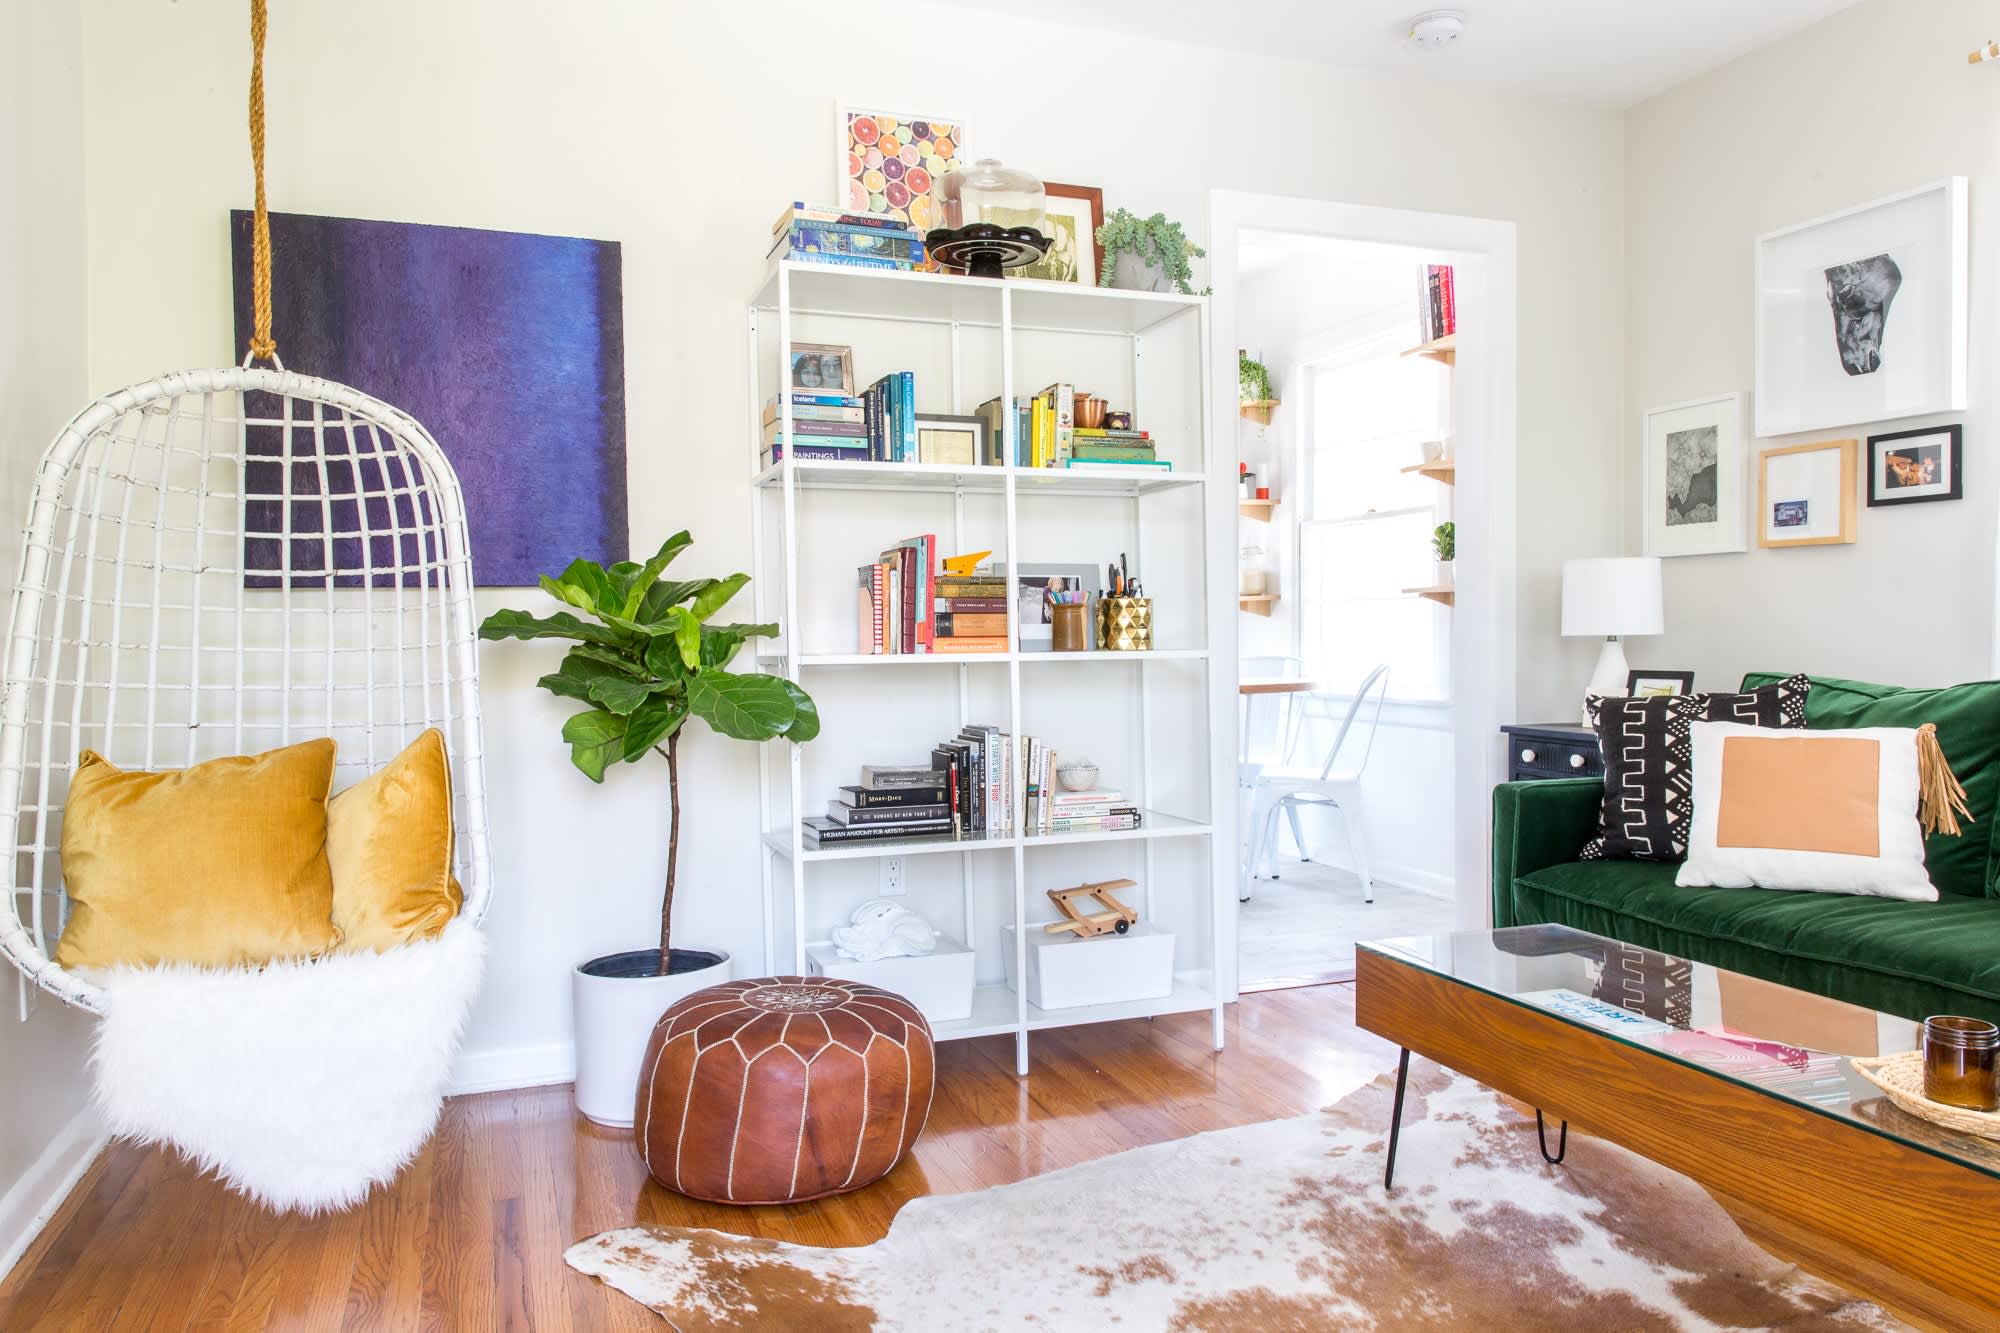 12 things you need to organize your home, according to 'The Home Edit' -  Reviewed